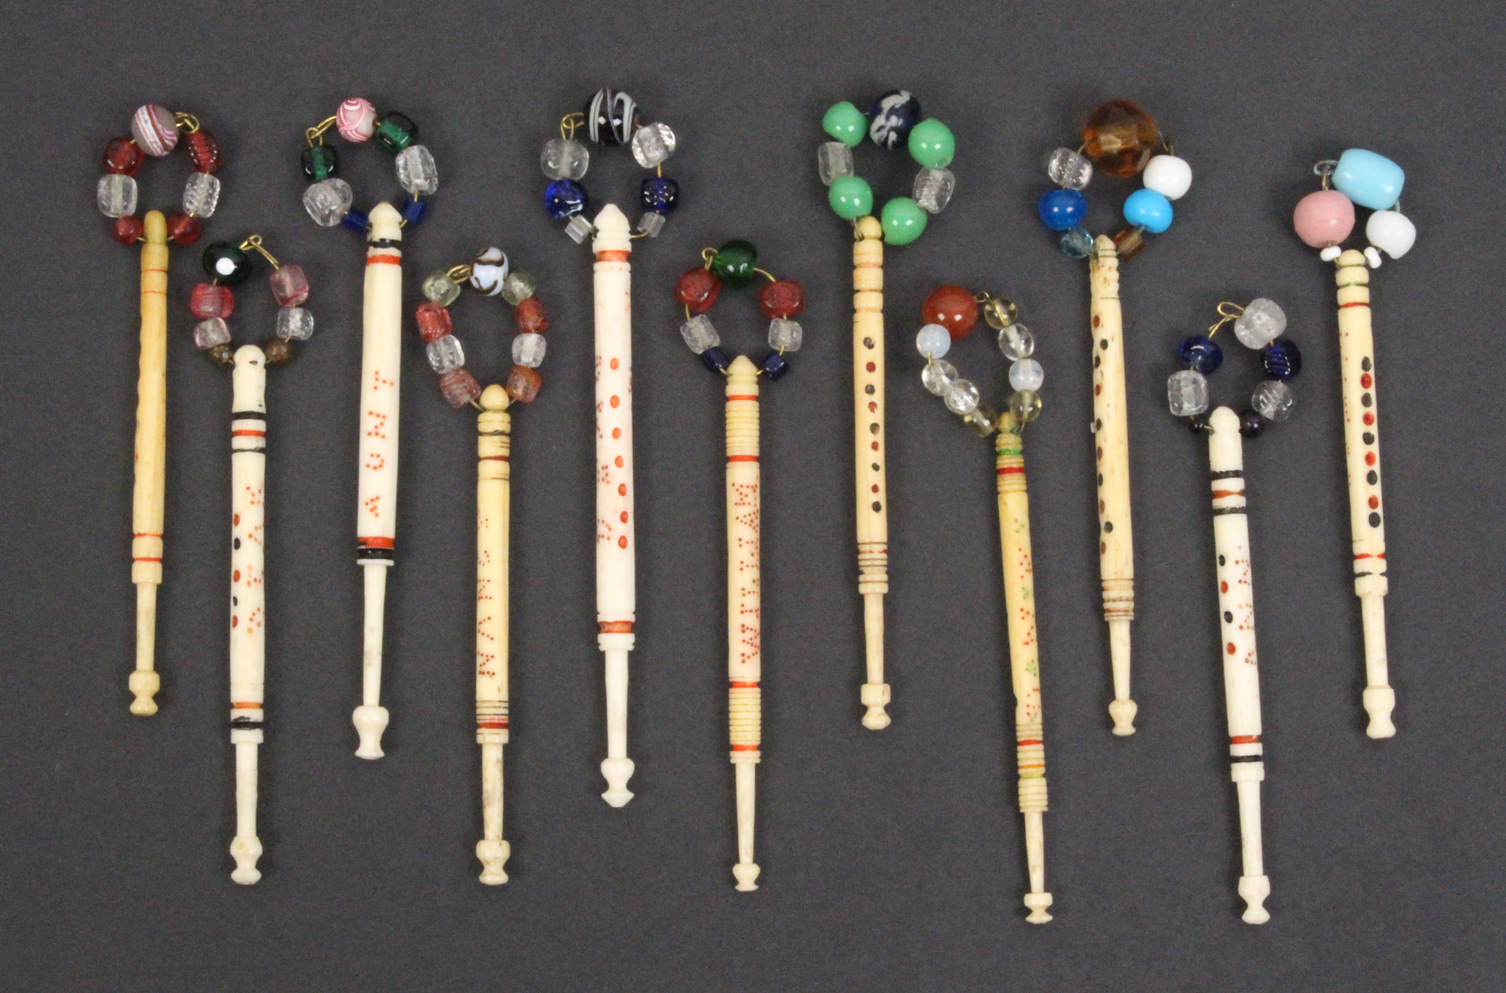 Nine silver Royal commemorative lace bobbins mostly by Robin K. How and from limited editions of